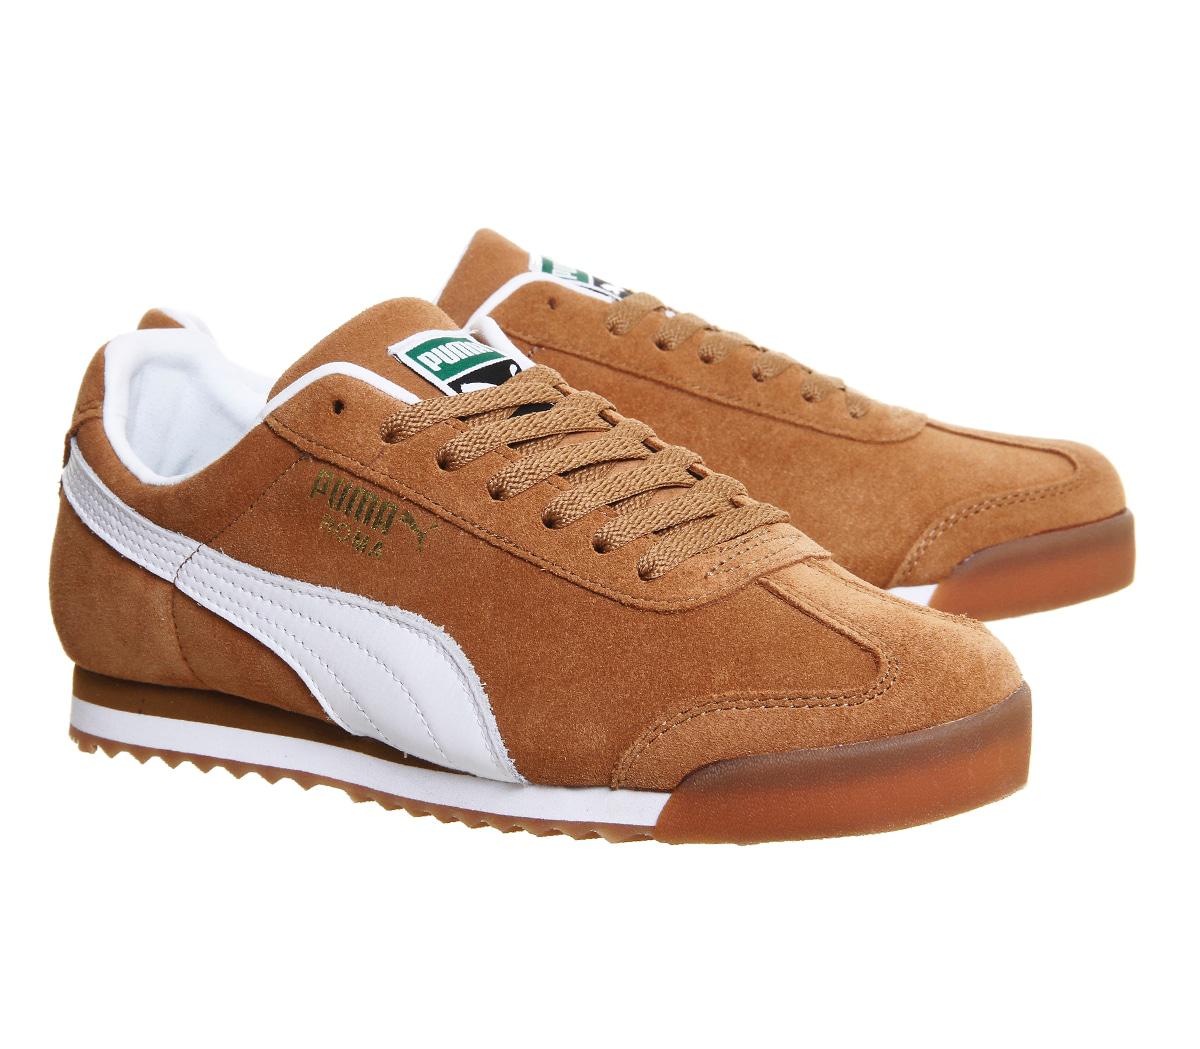 Lyst - PUMA Roma in Brown for Men